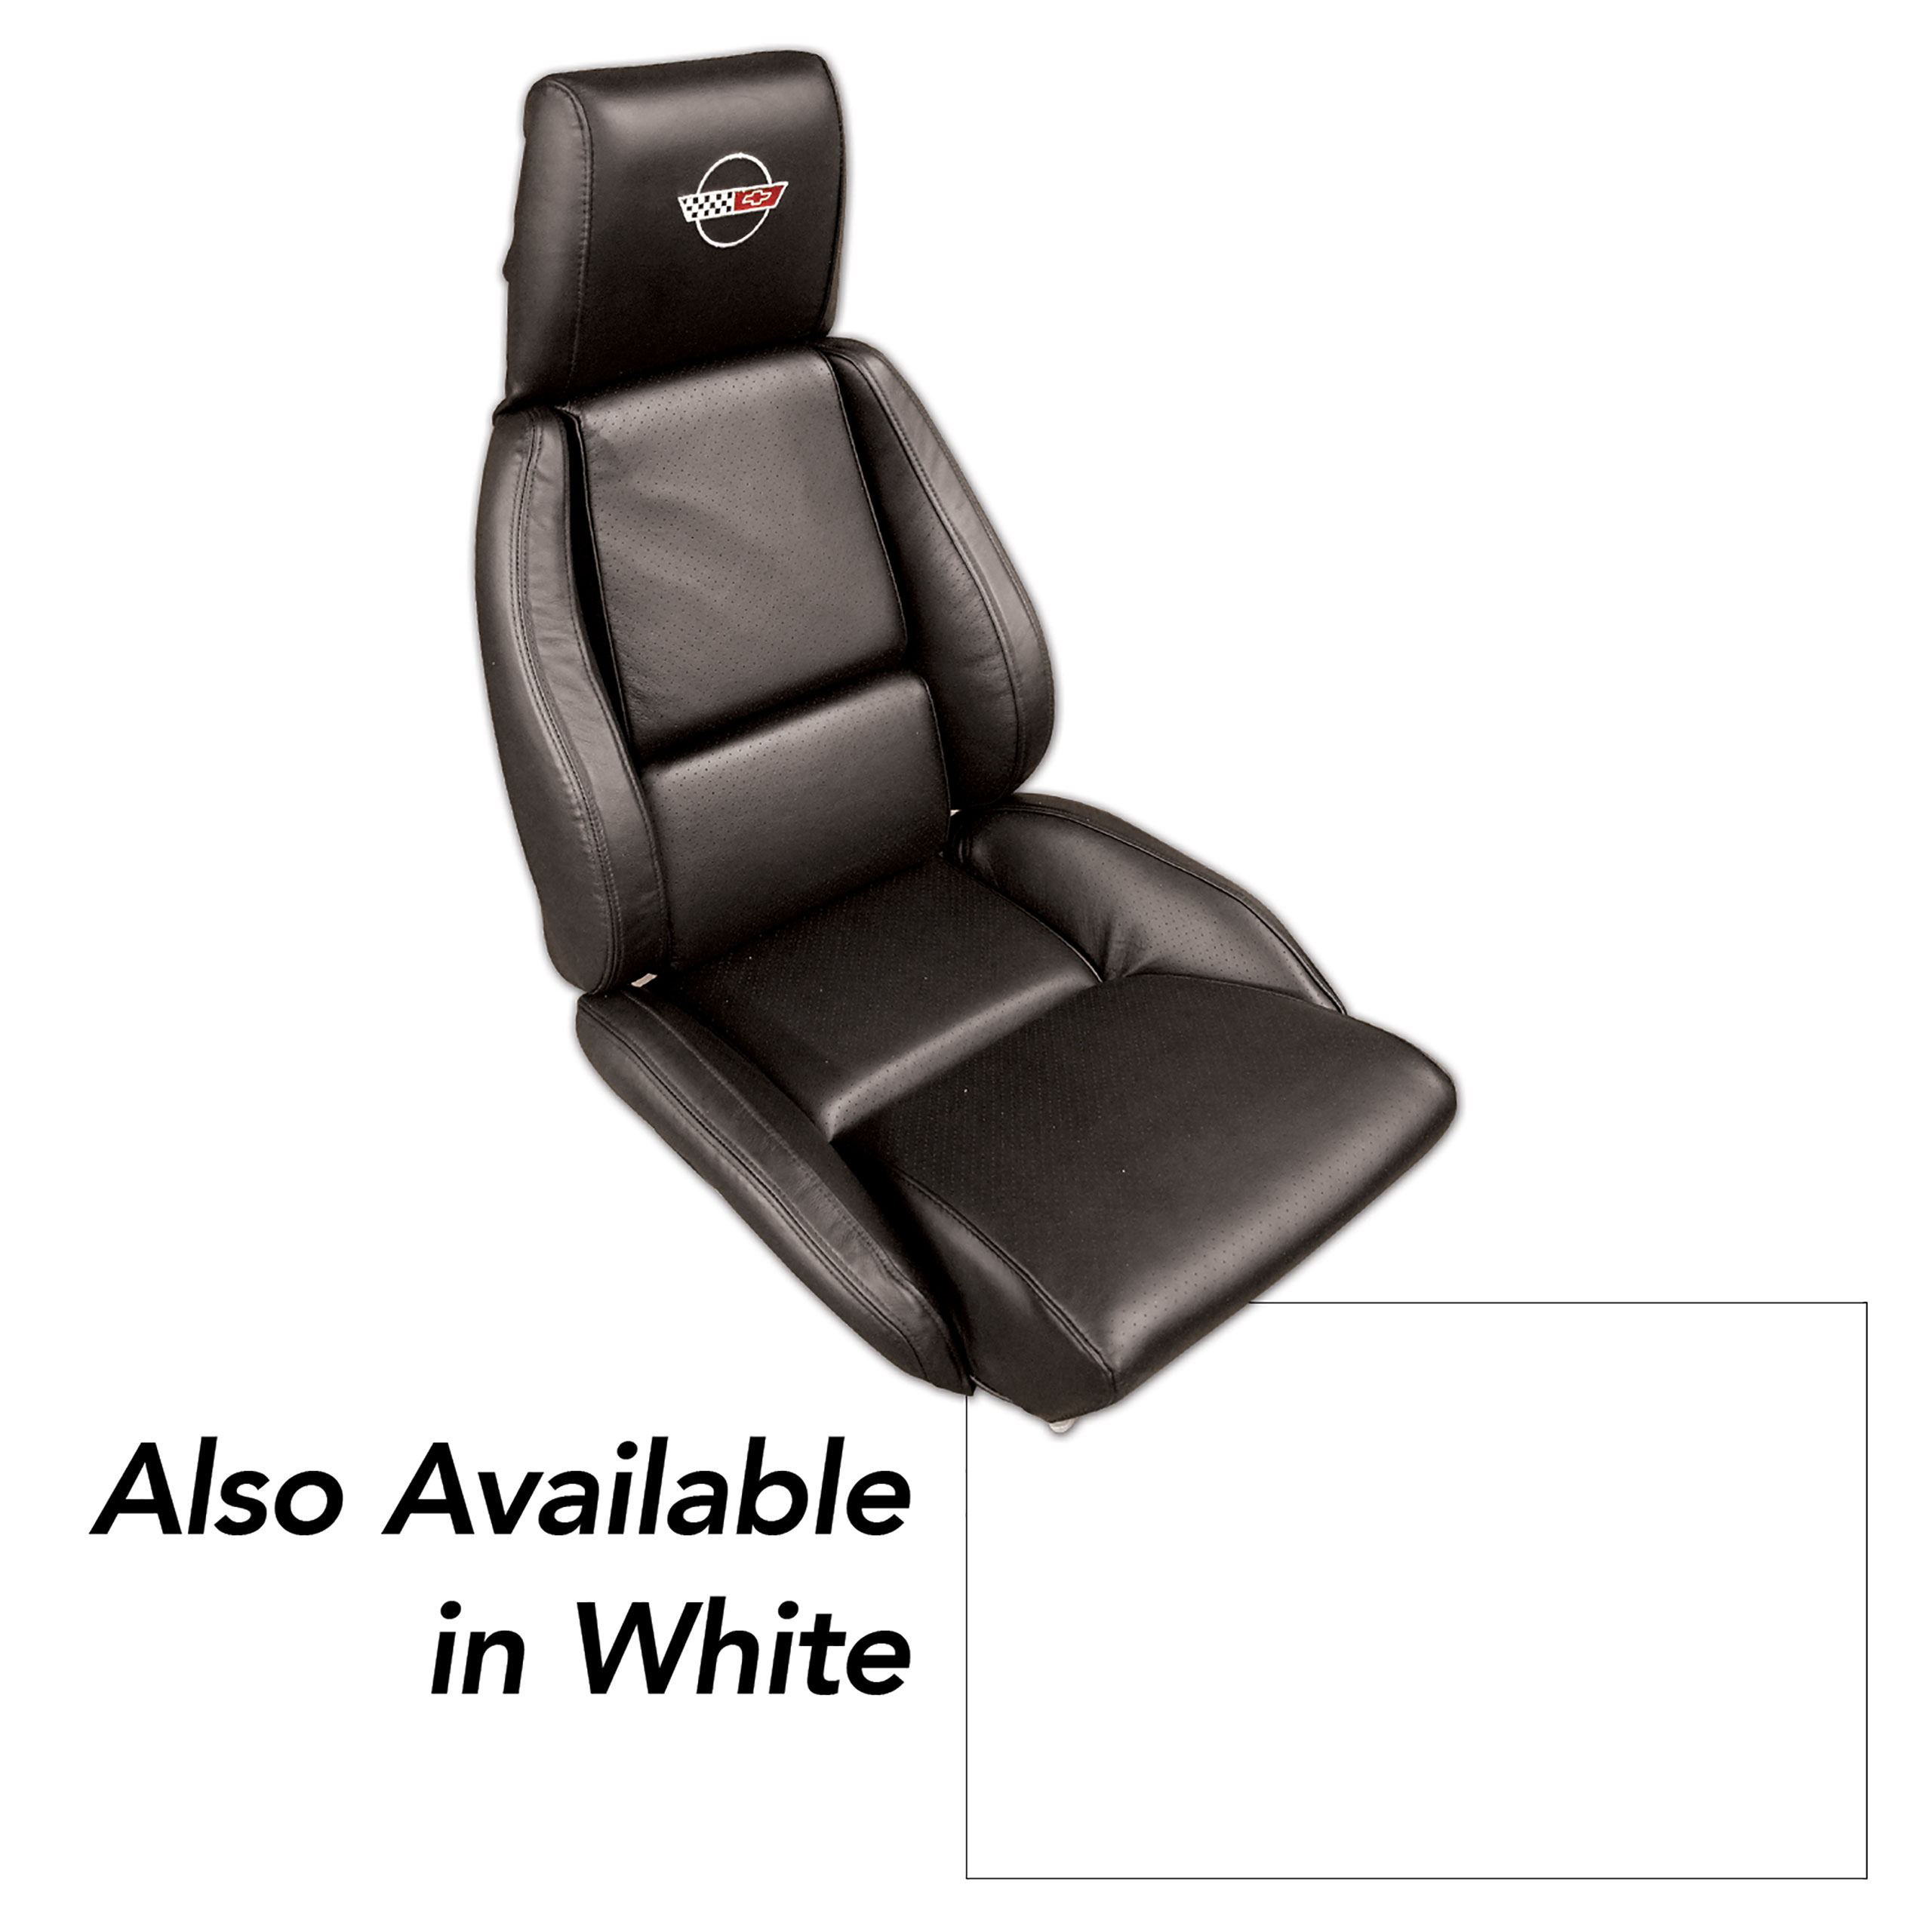 1992 C4 Corvette OE Style Embroidered Standard Leather Seat Covers - White